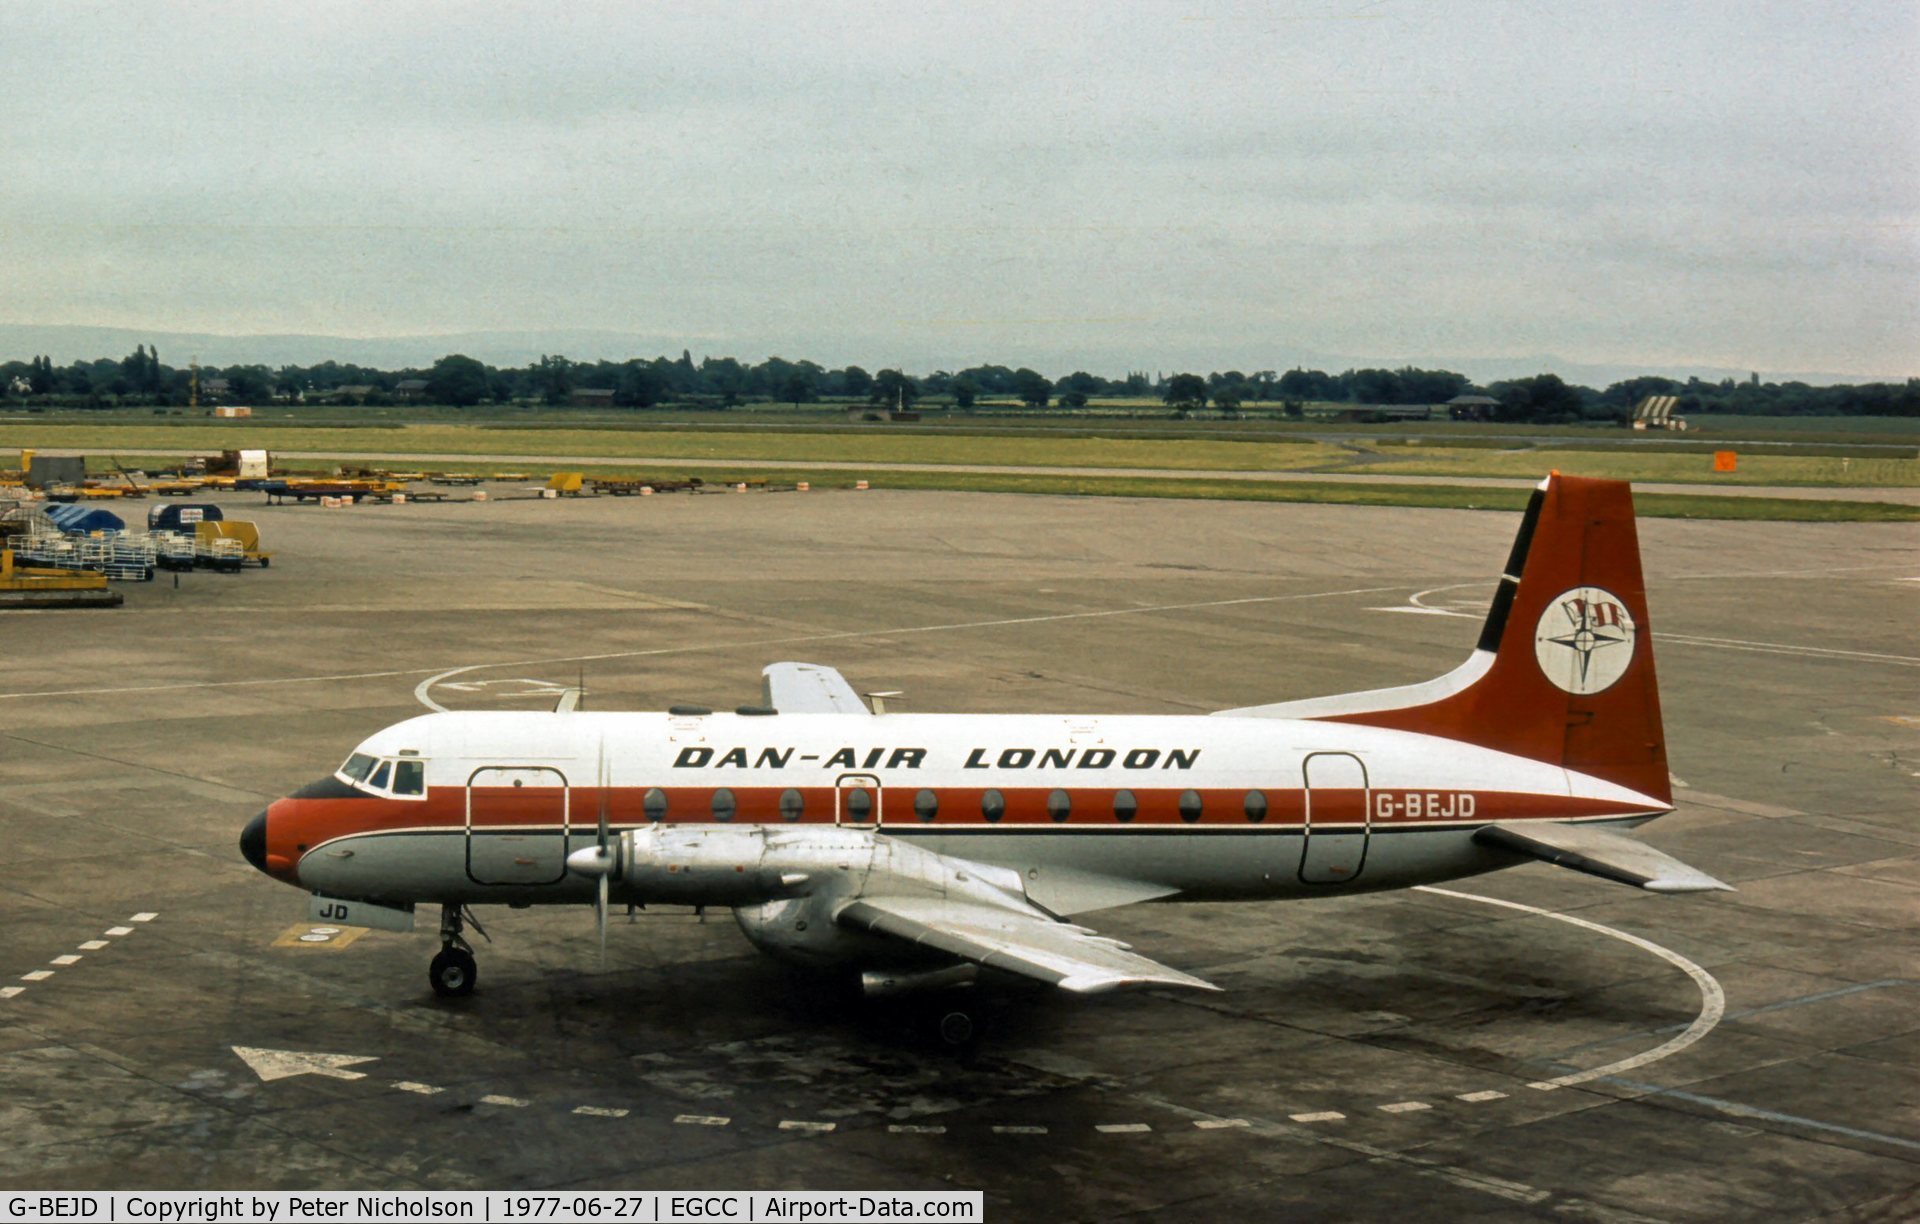 G-BEJD, 1961 Hawker Siddeley 748-105 Sr 1 C/N 1543, HS.748 of Dan-Air Services Ltd at Manchester in the Summer of 1977.